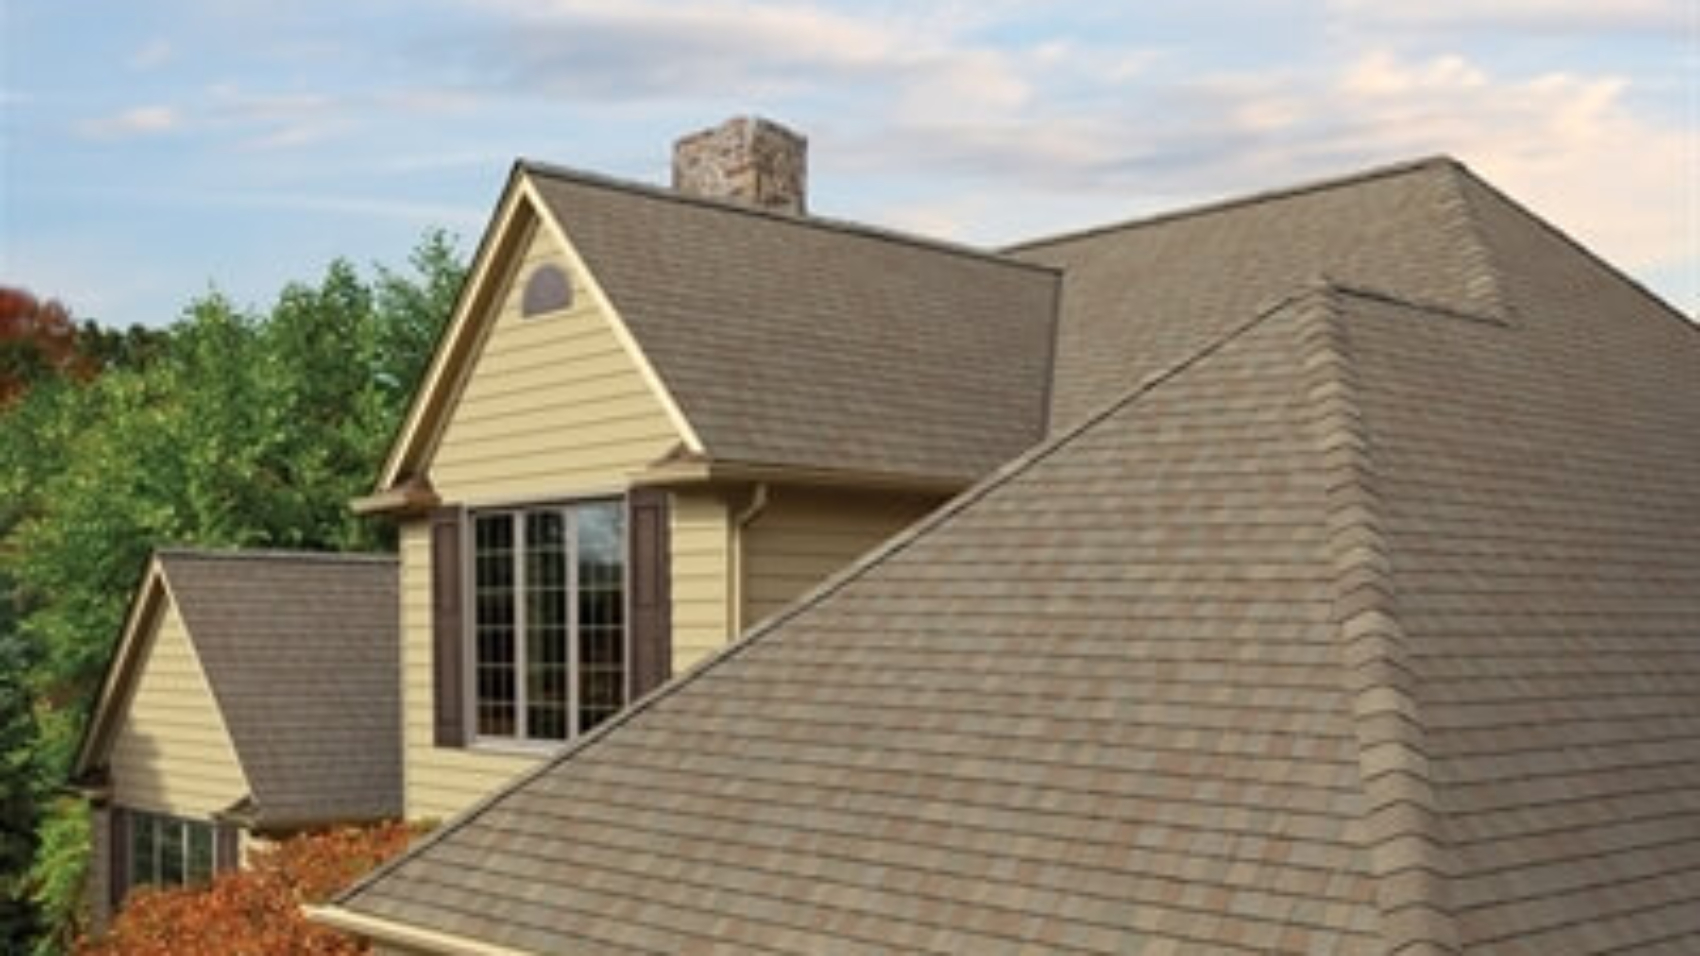 Photo of a home using GAF's Timberline American Harvest Amber Wheat shingles